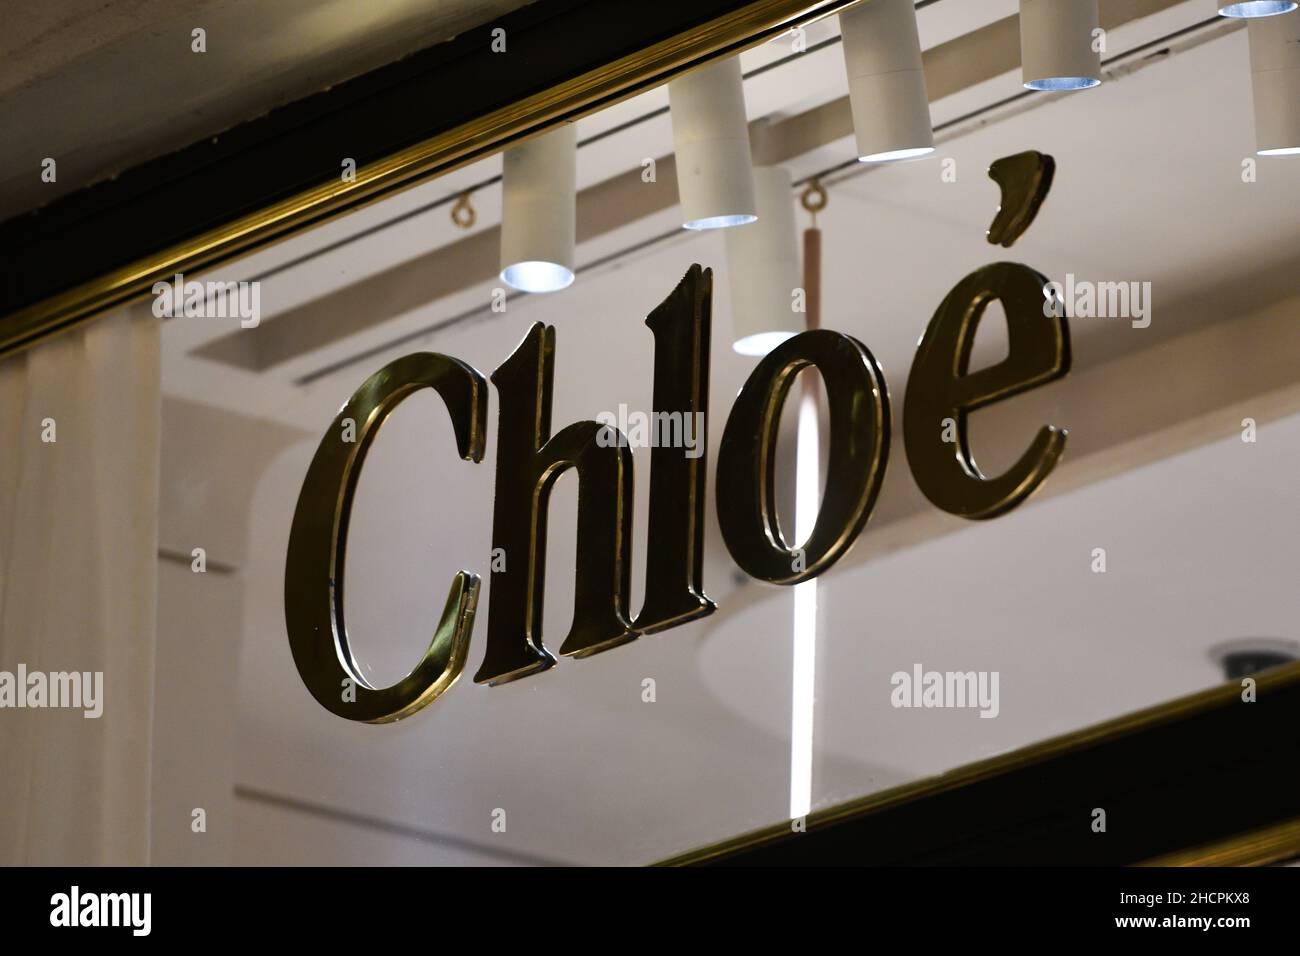 Chloe' brand logo in the corner shop at the international airport of  Istanbul, Turkey Stock Photo - Alamy